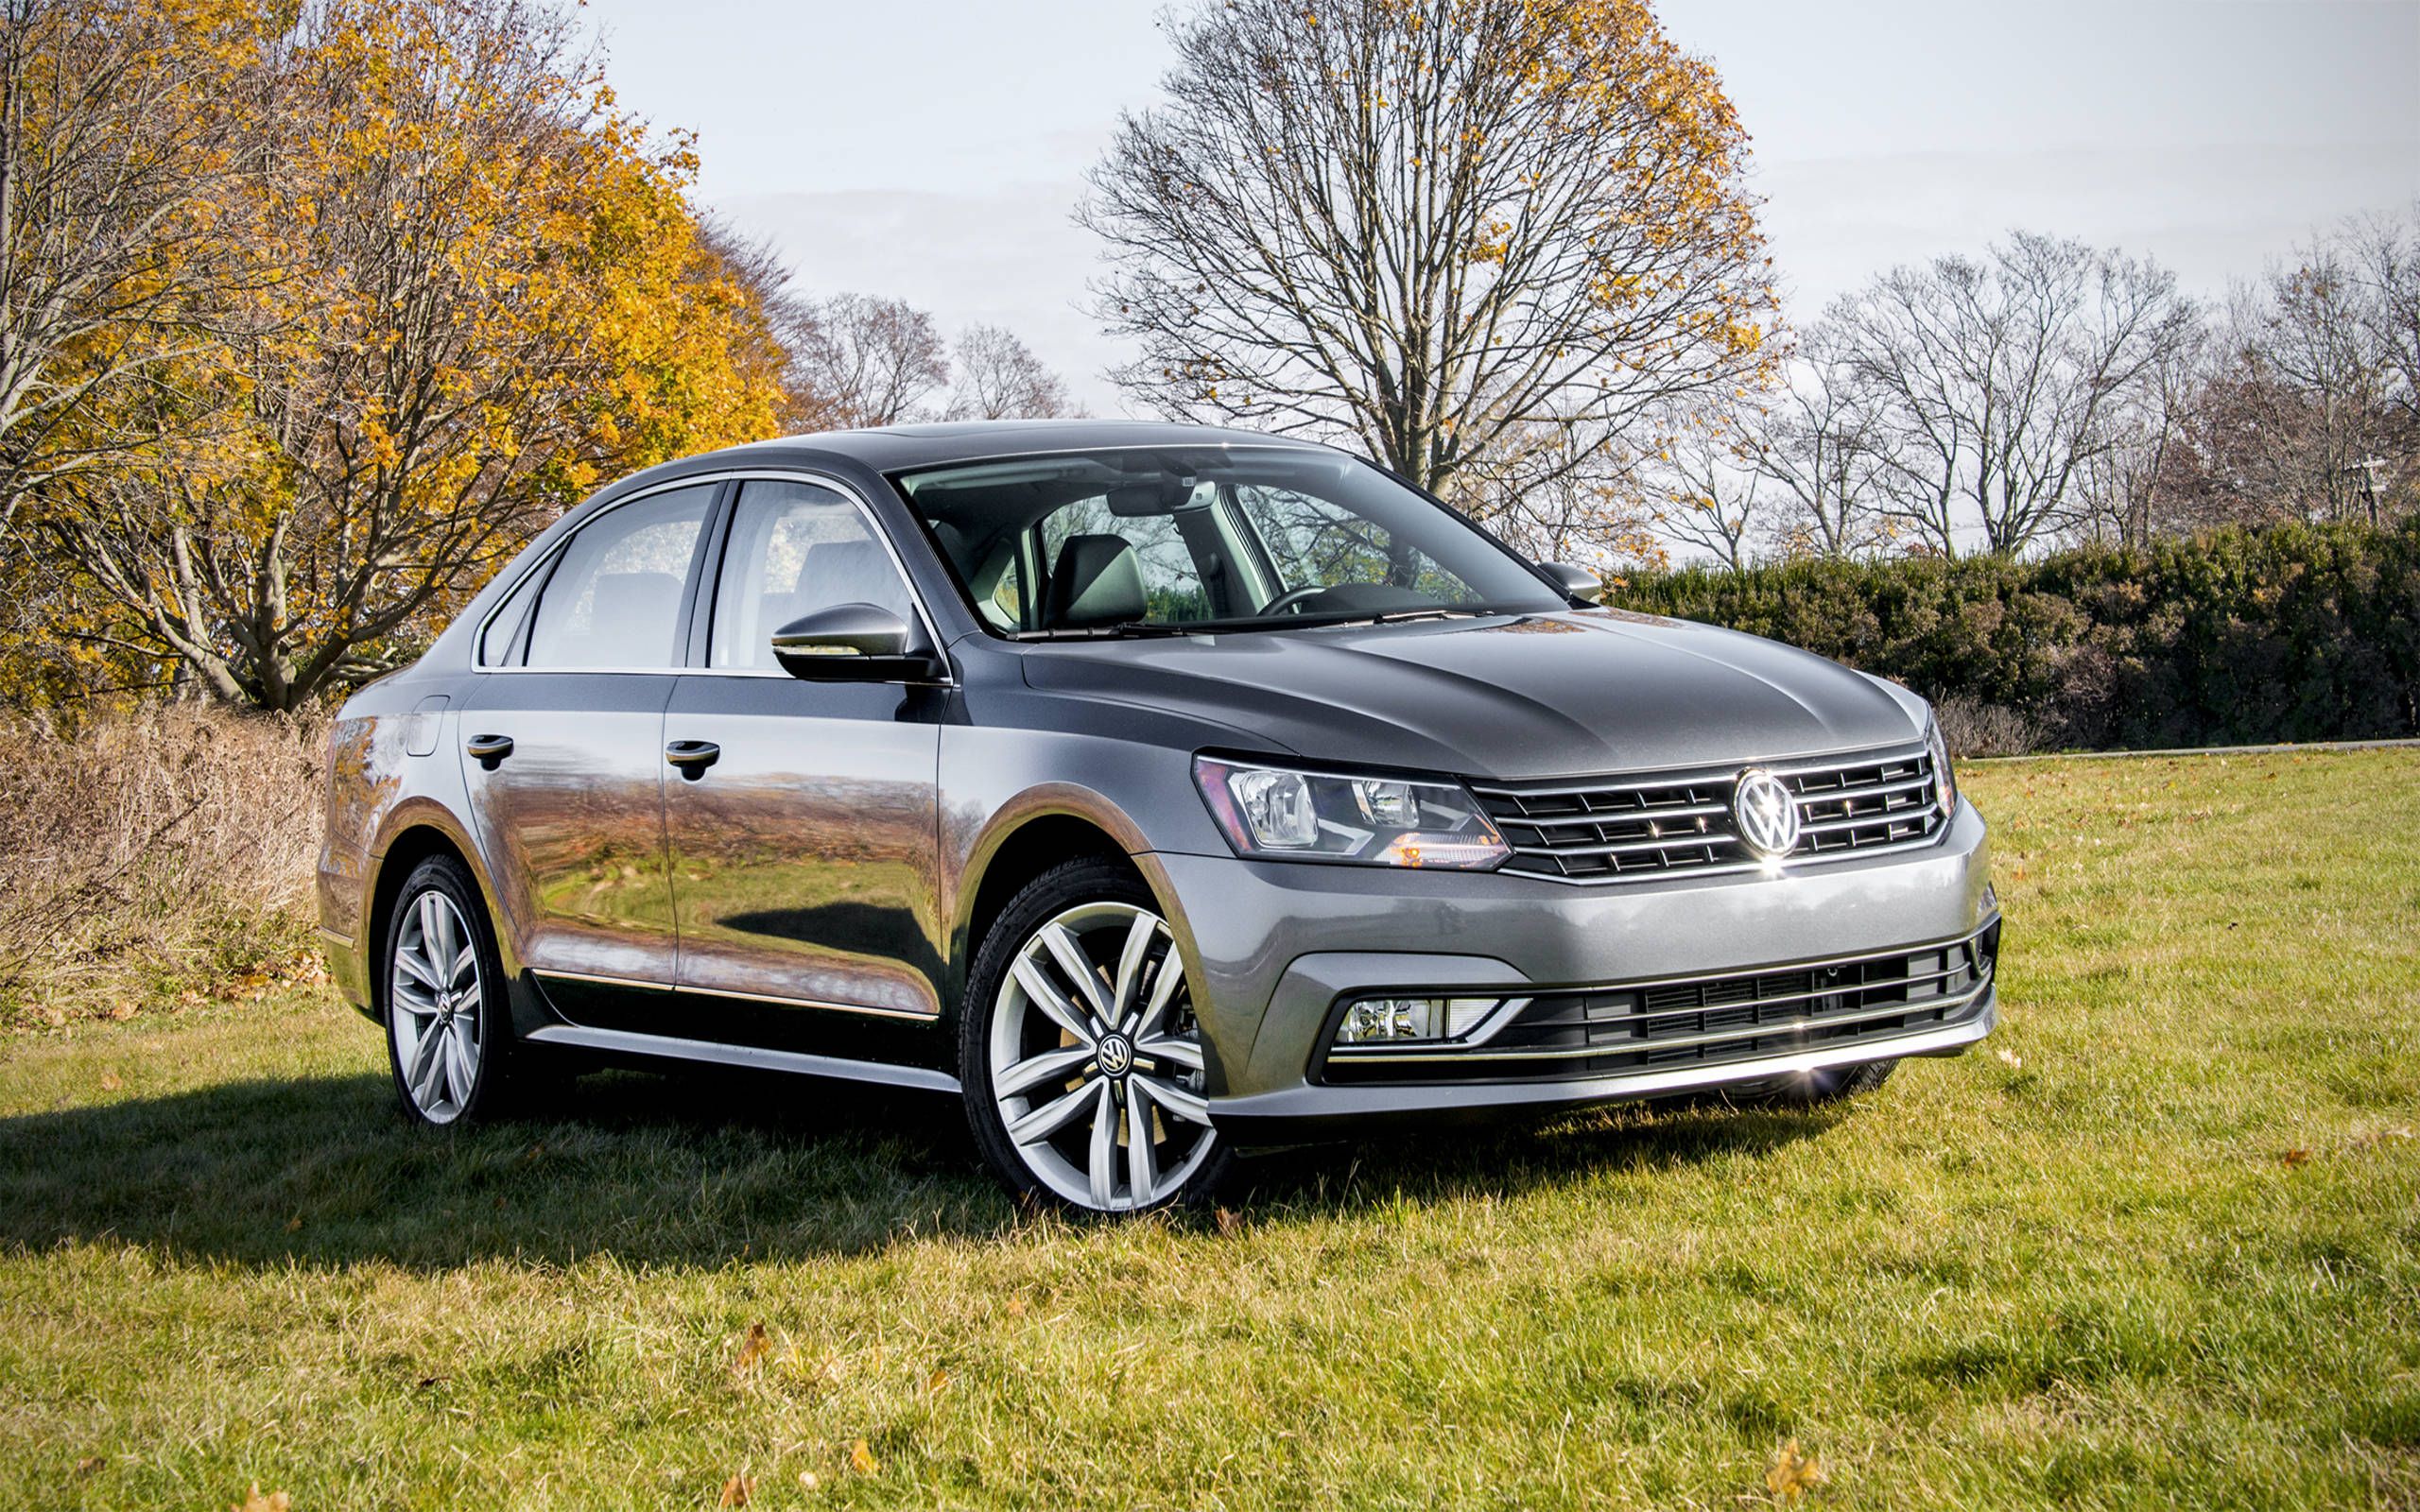 Volkswagen Passat 1.8T review: Team Germany's bread-and-butter